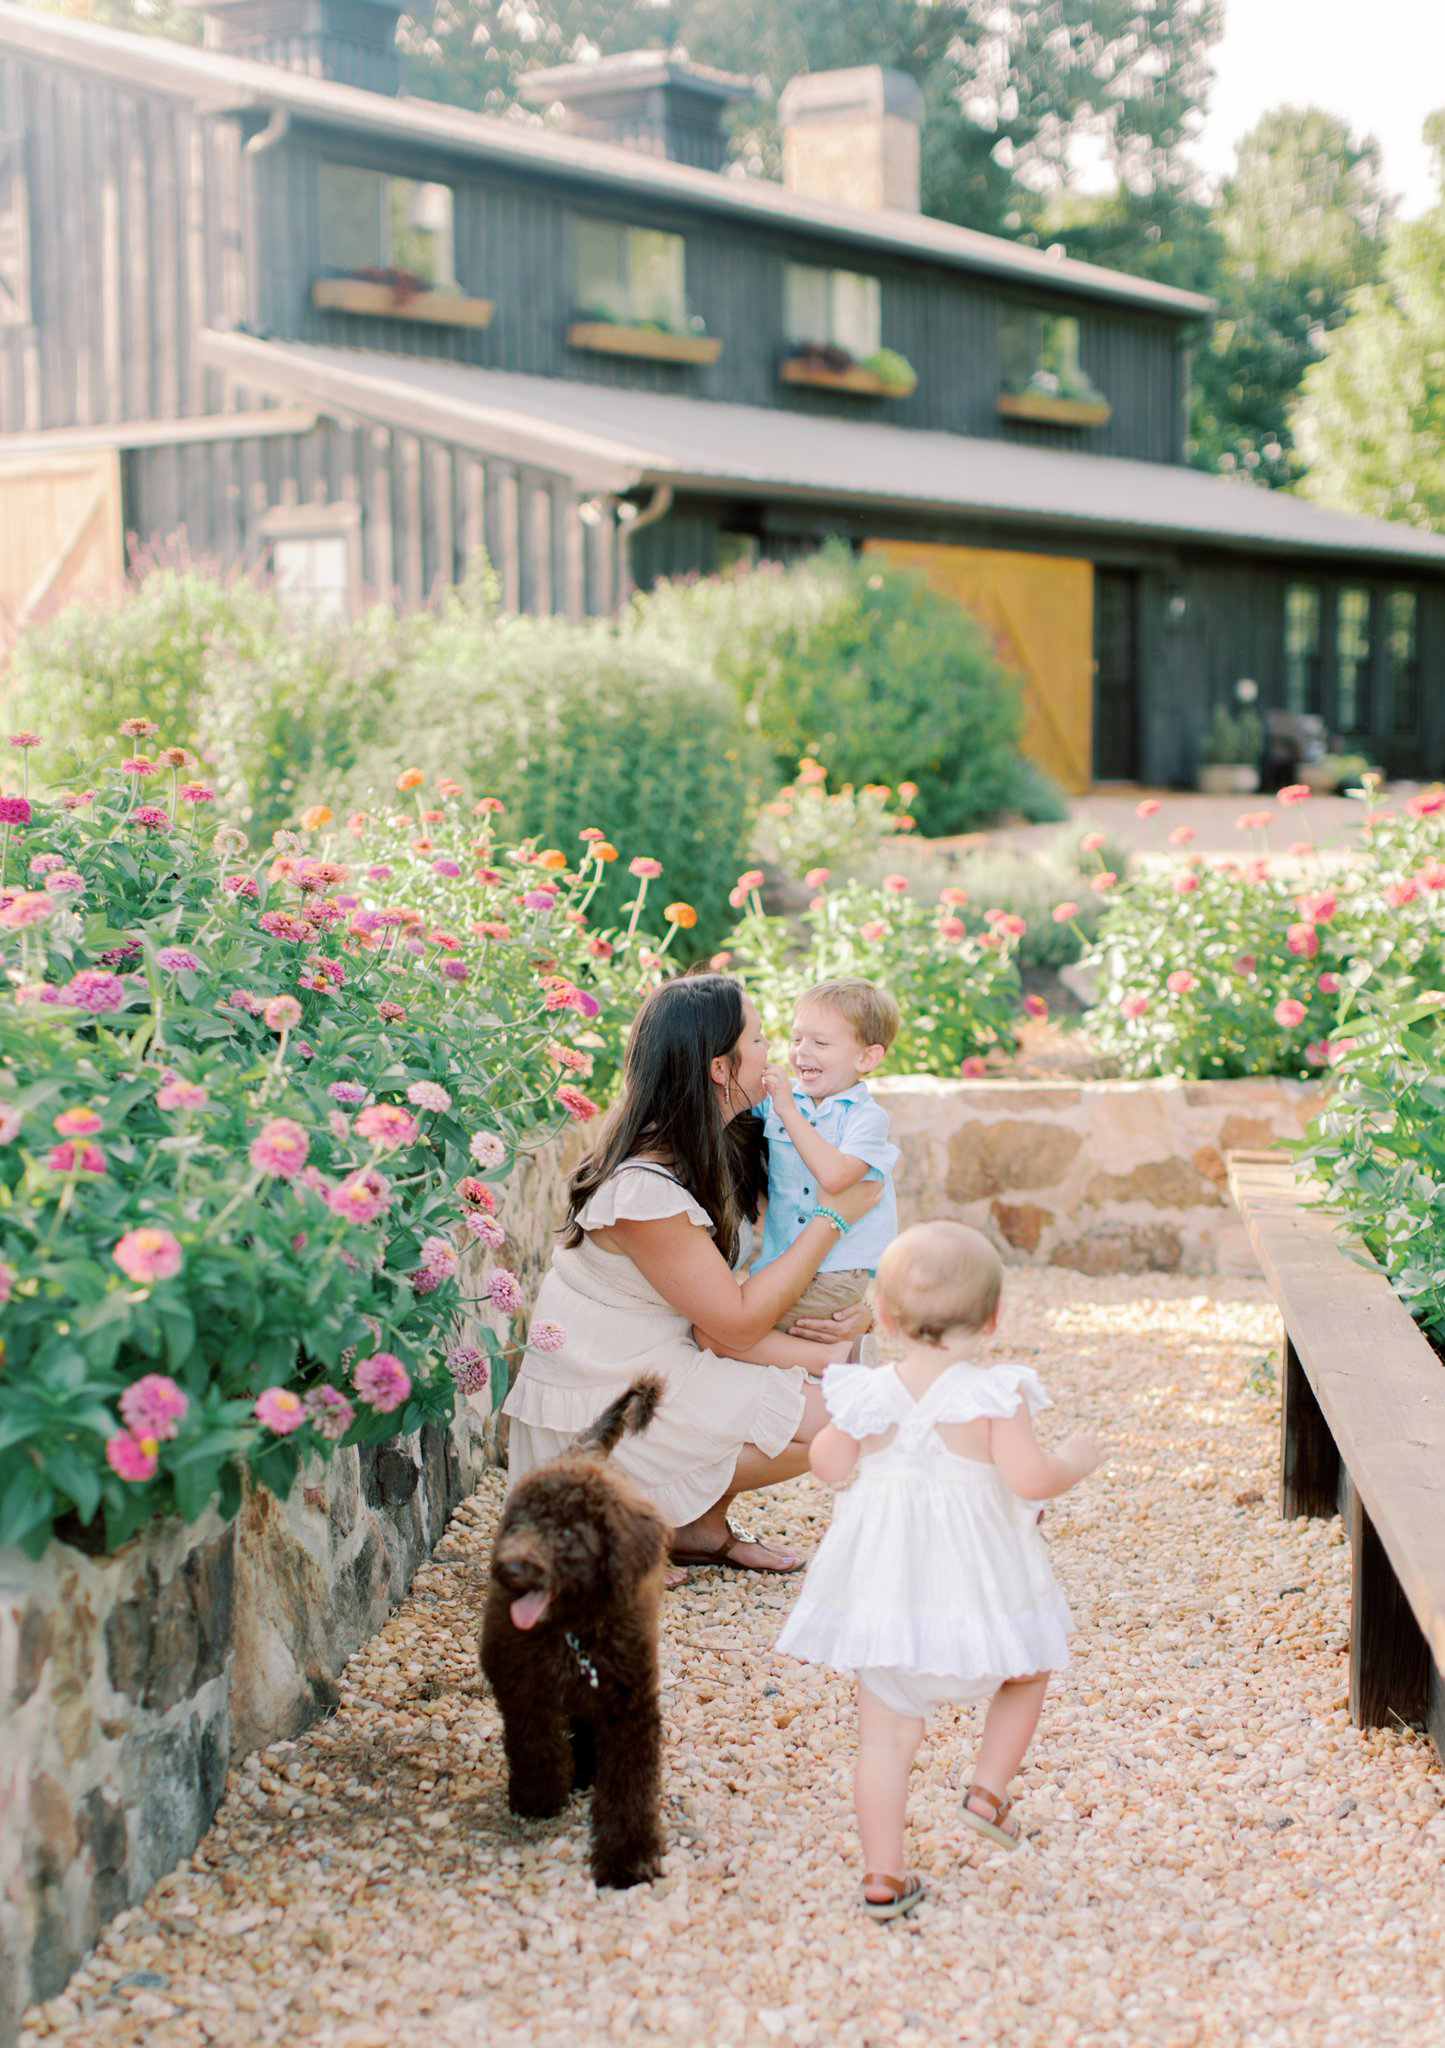 Athens GA: Finding the Perfect Family Photographer